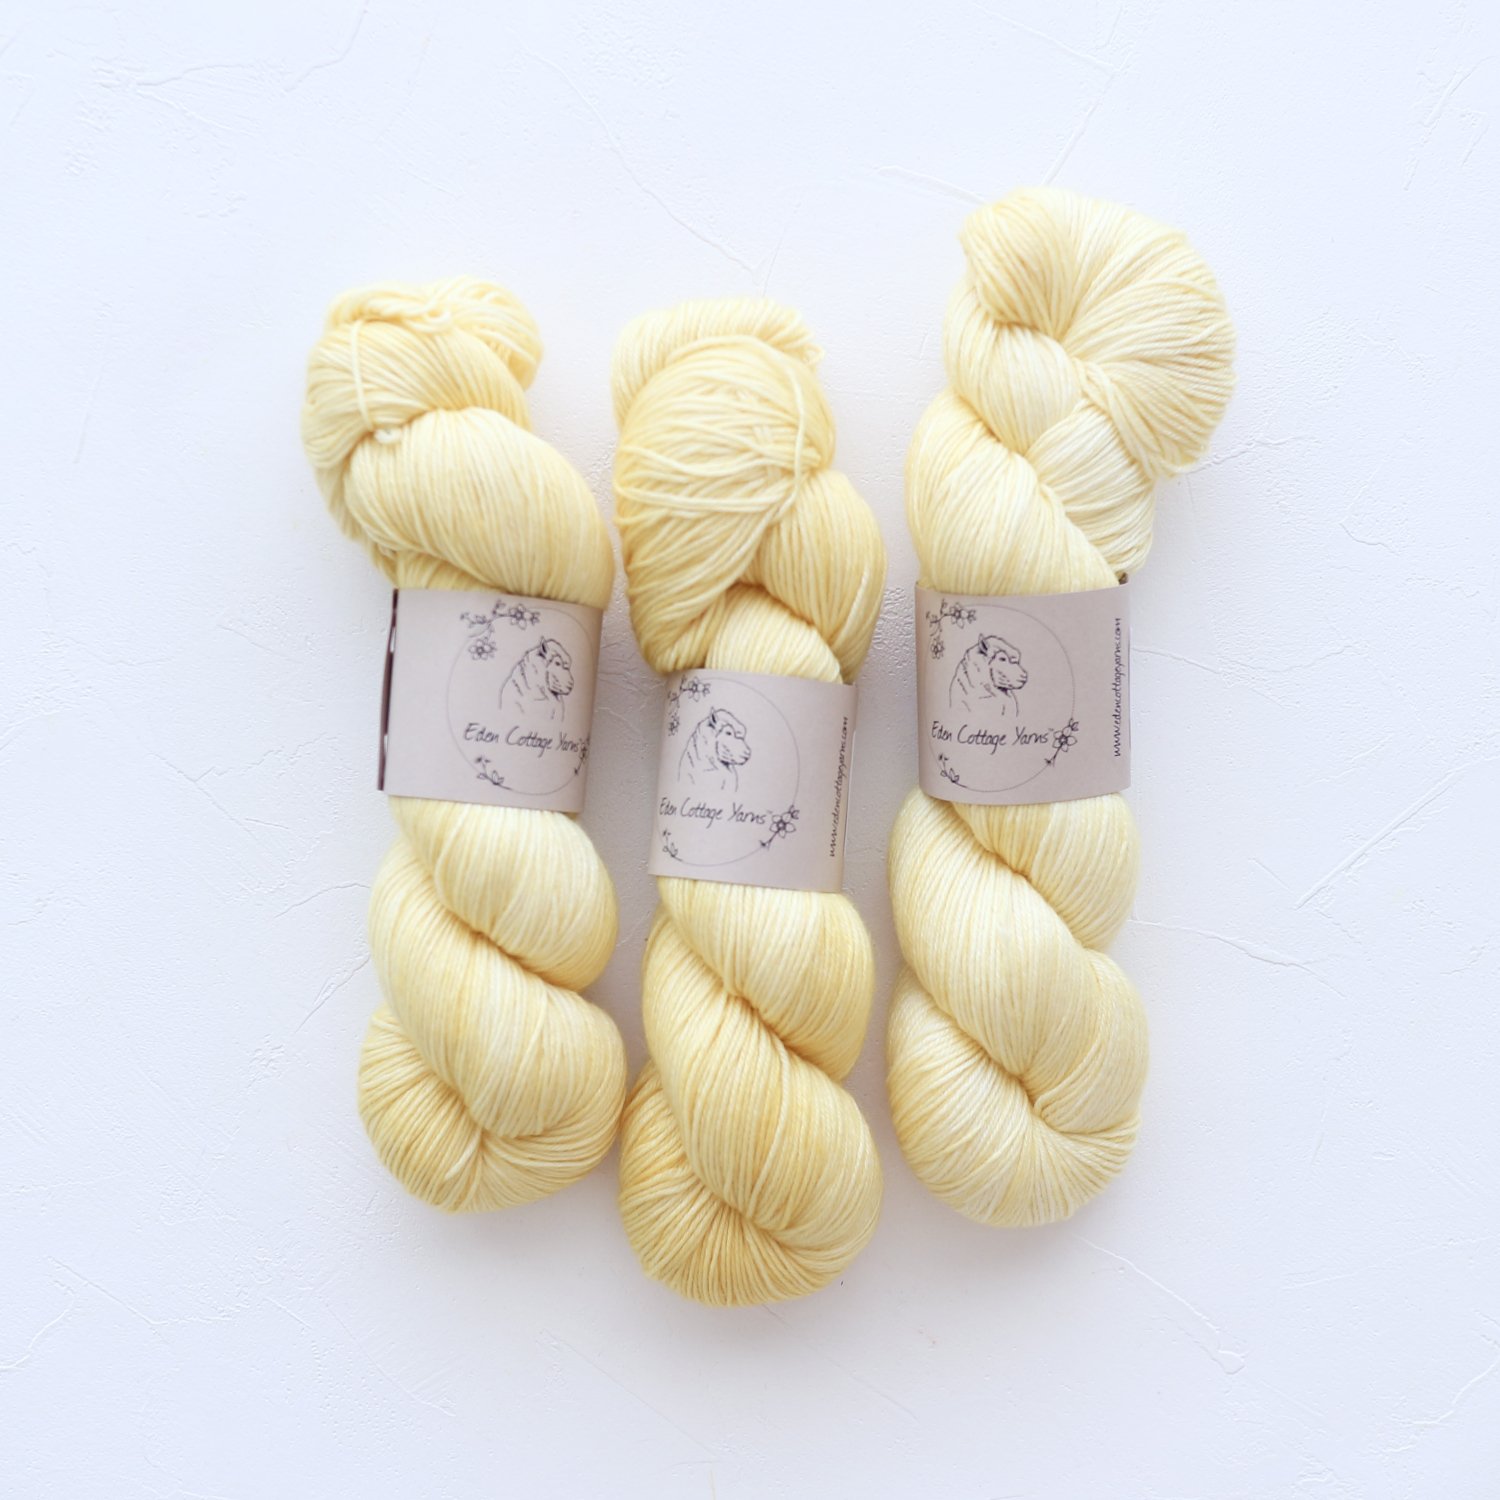 【Eden Cottage Yarns】<br>Pendle 4ply<br>Daffodil